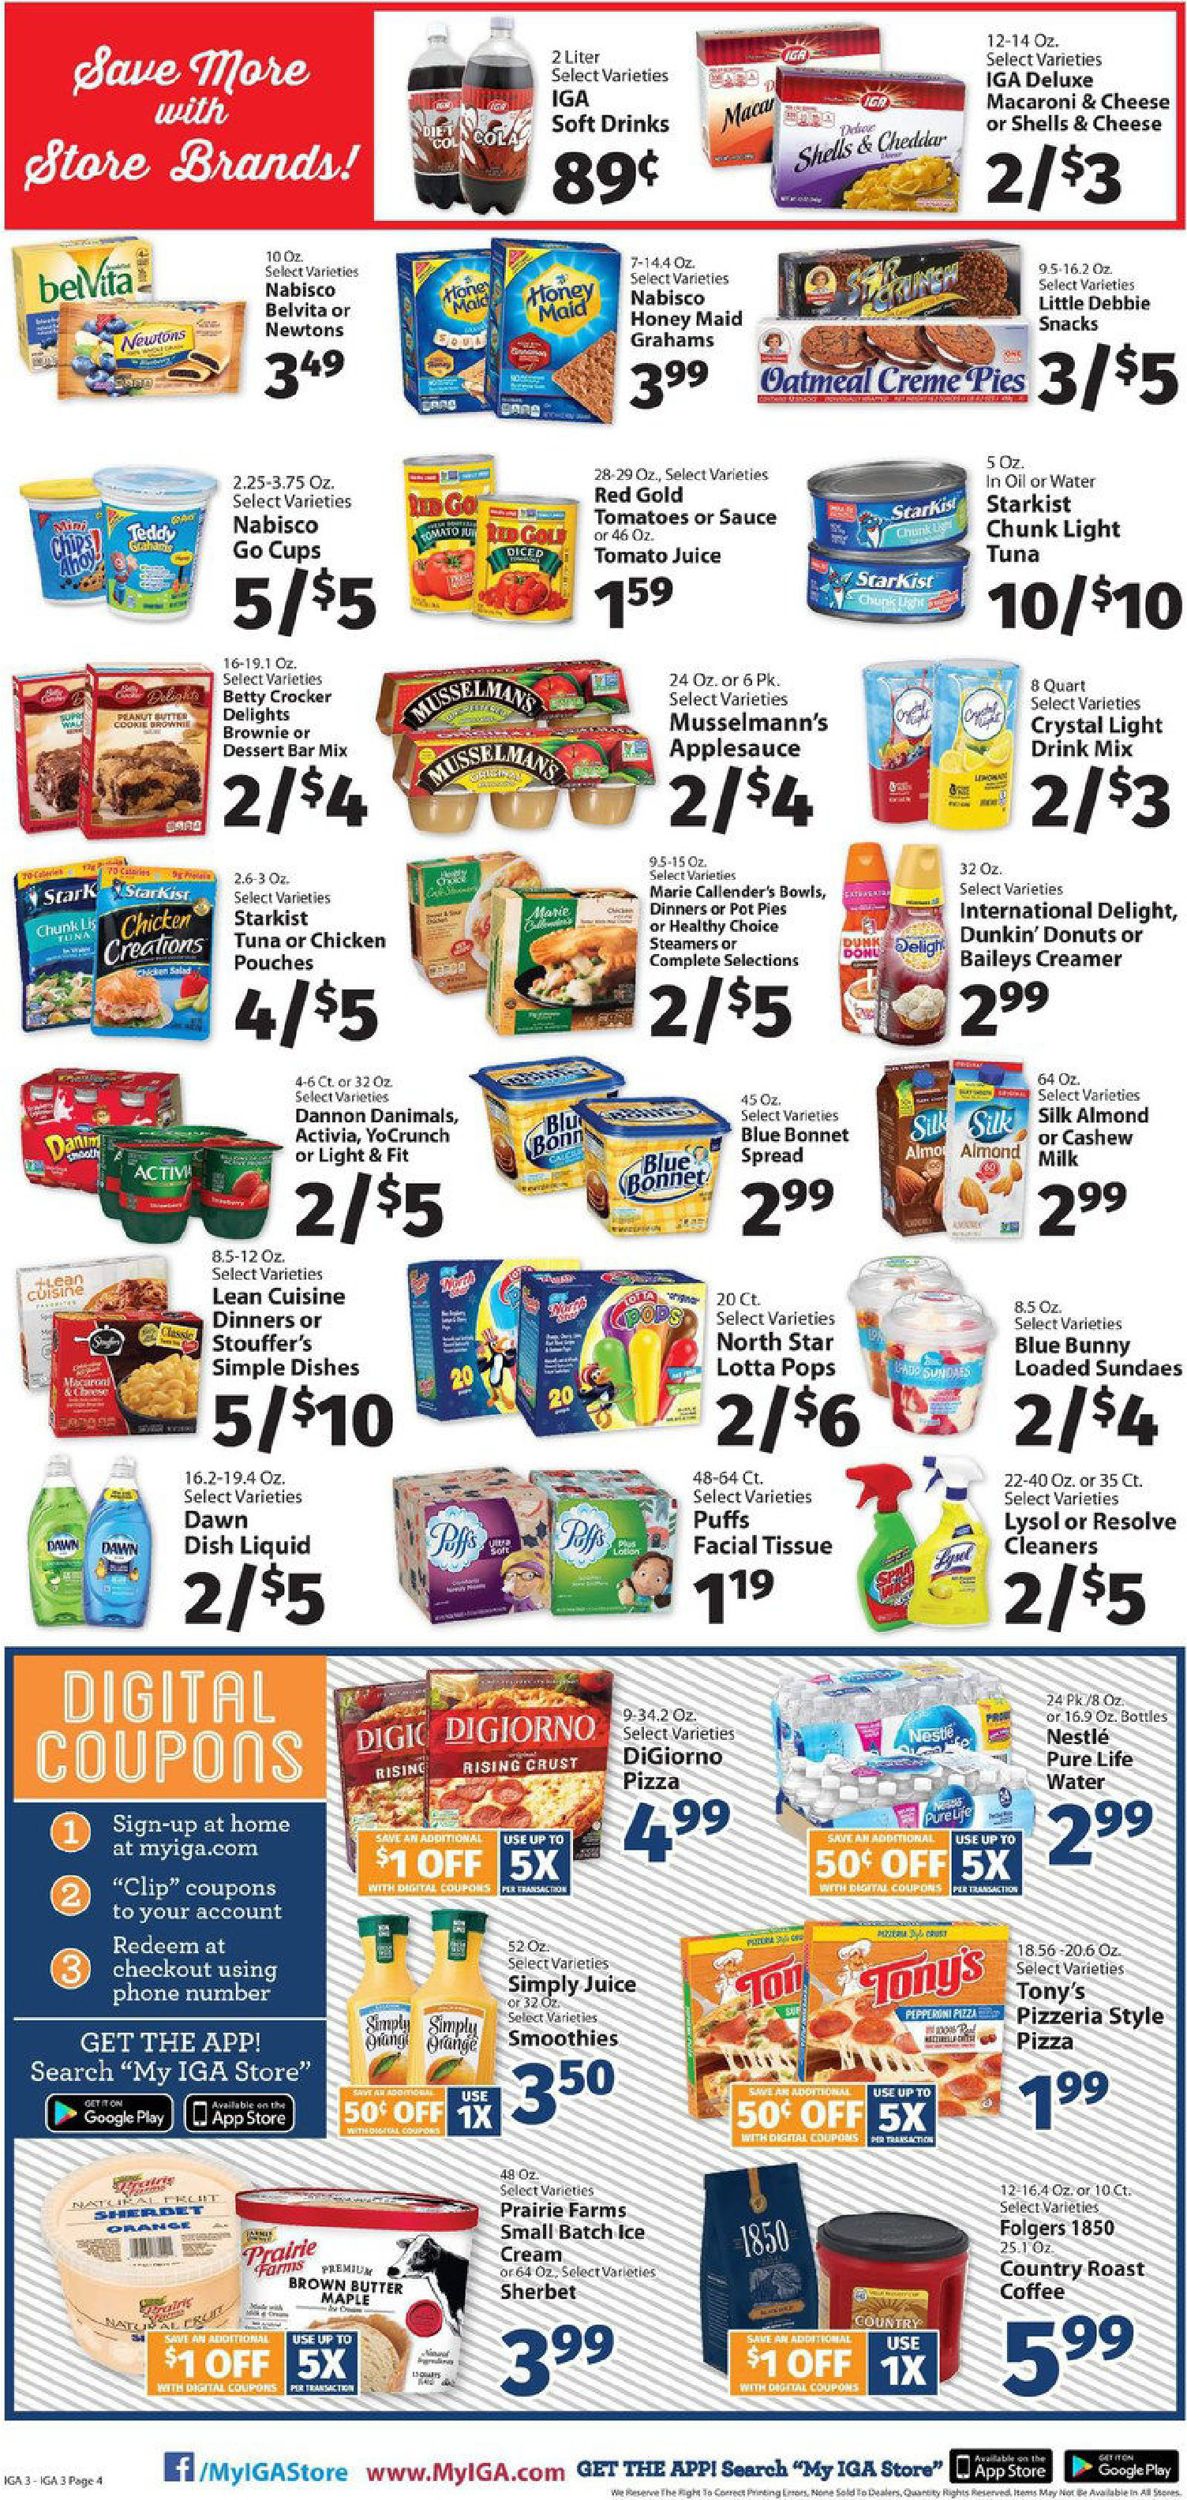 IGA Current weekly ad 08/05 - 08/11/2019 [4] - frequent-ads.com